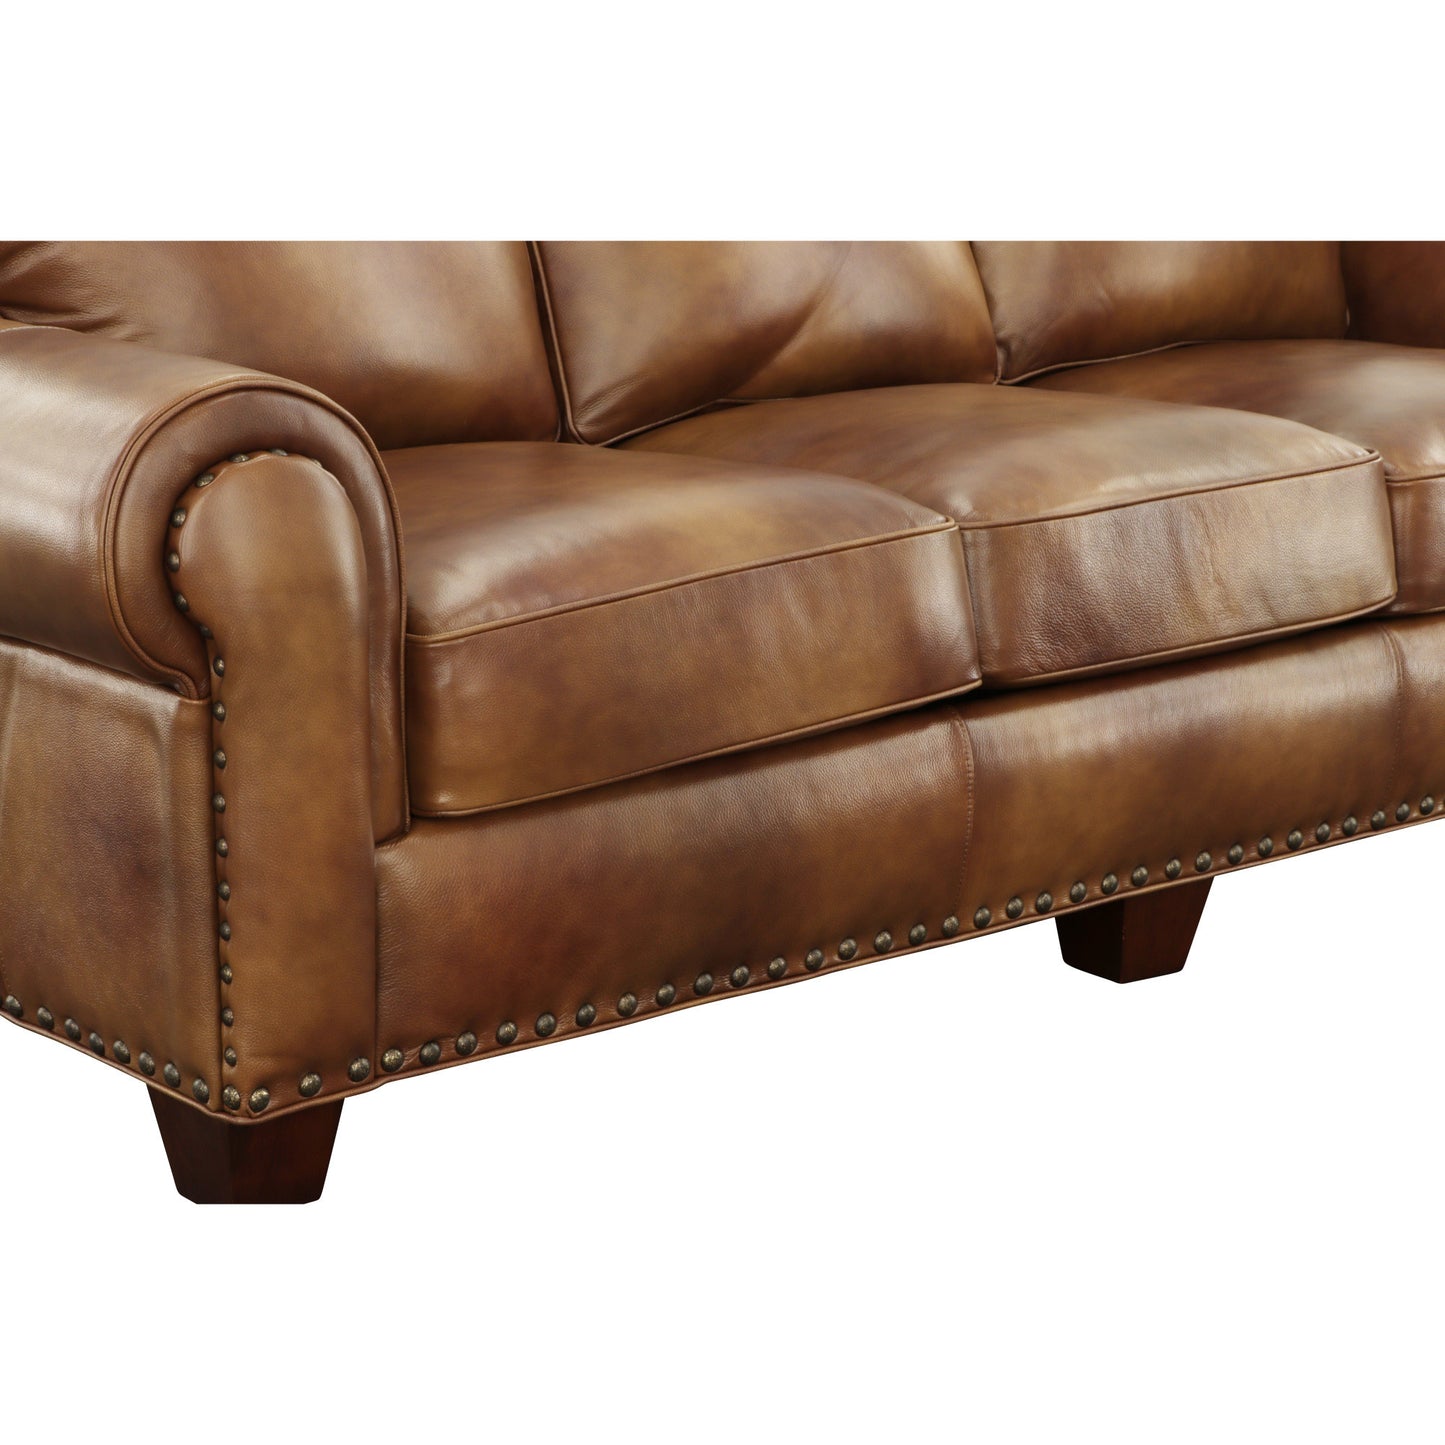 Rustic Styled Leather Sofa - Premium Construction, Top-Grain Leather - Eight-Way Hand-Tied Springs, Nail-Head Trim, Contrasting Pillows